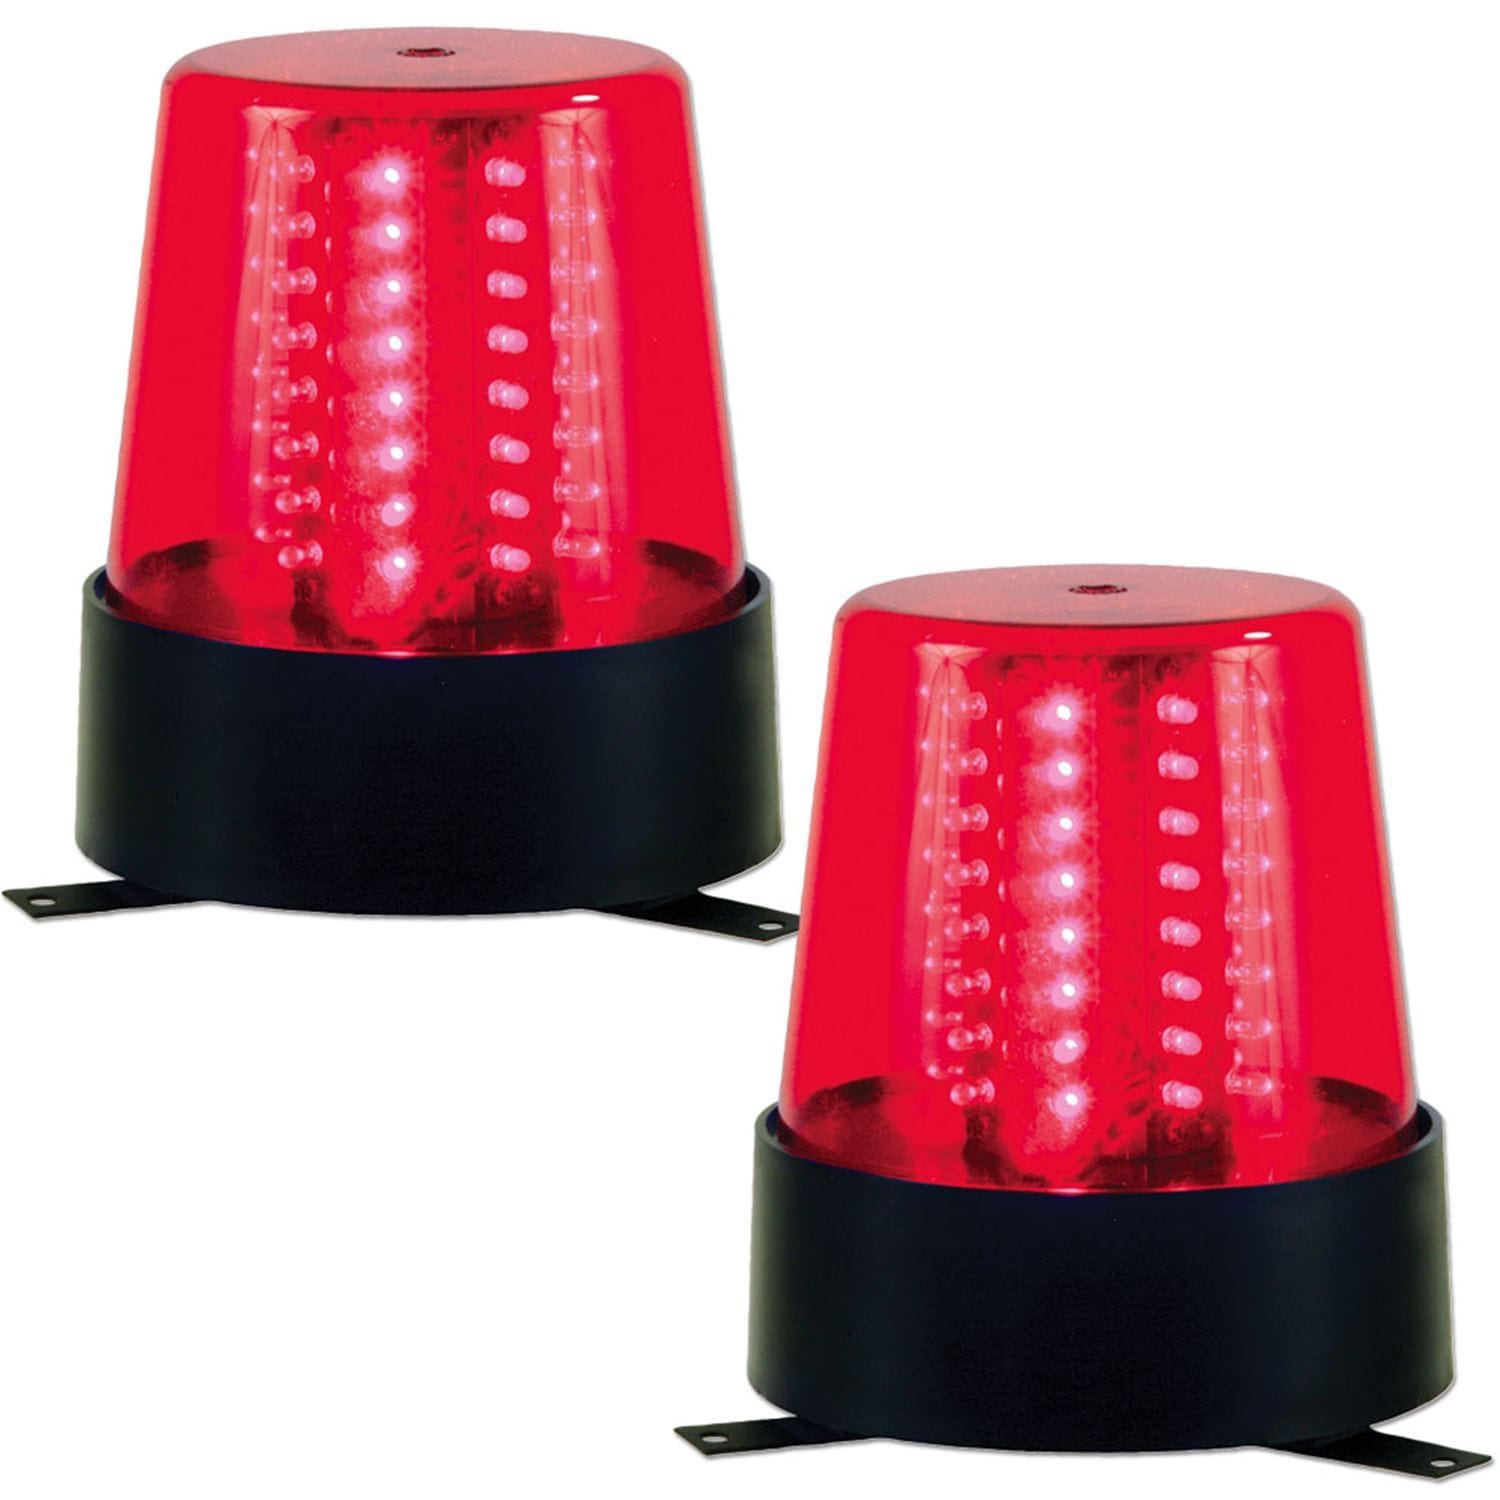 ADJ American DJ Professional B6RLED Red Stage Beacon Light 2-Pack - ProSound and Stage Lighting